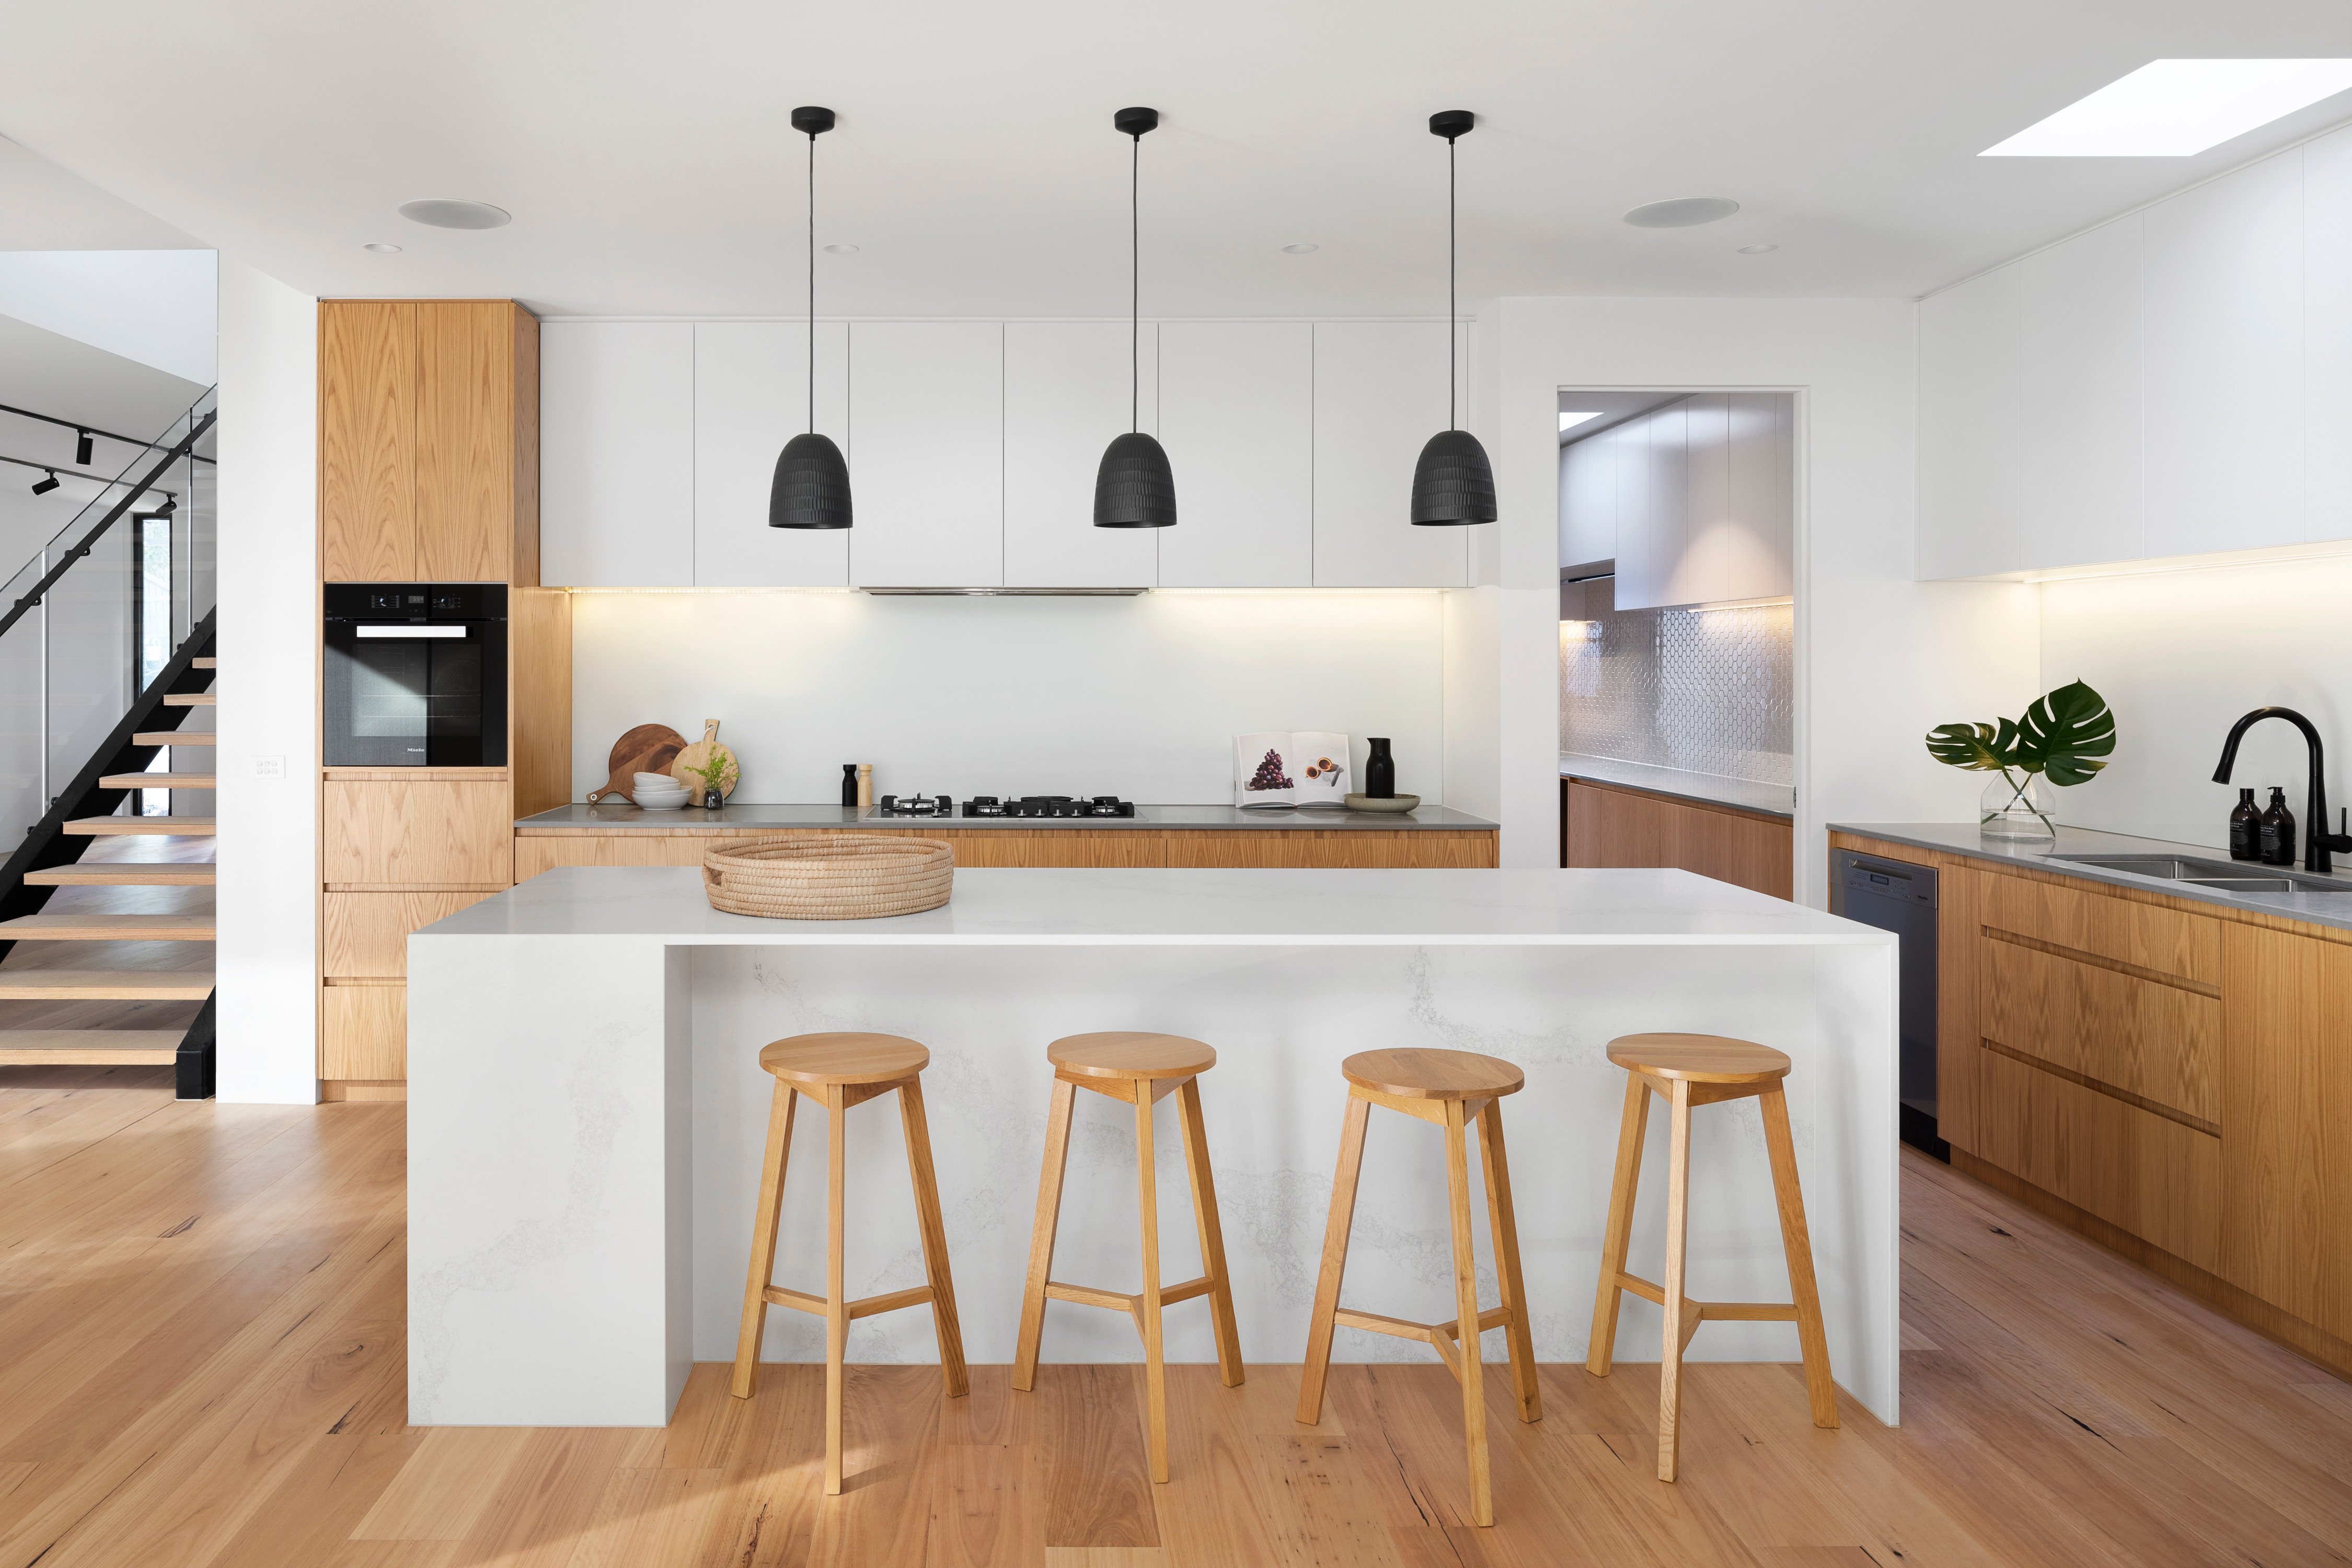 Modern kitchen with wood elements and 4 stools